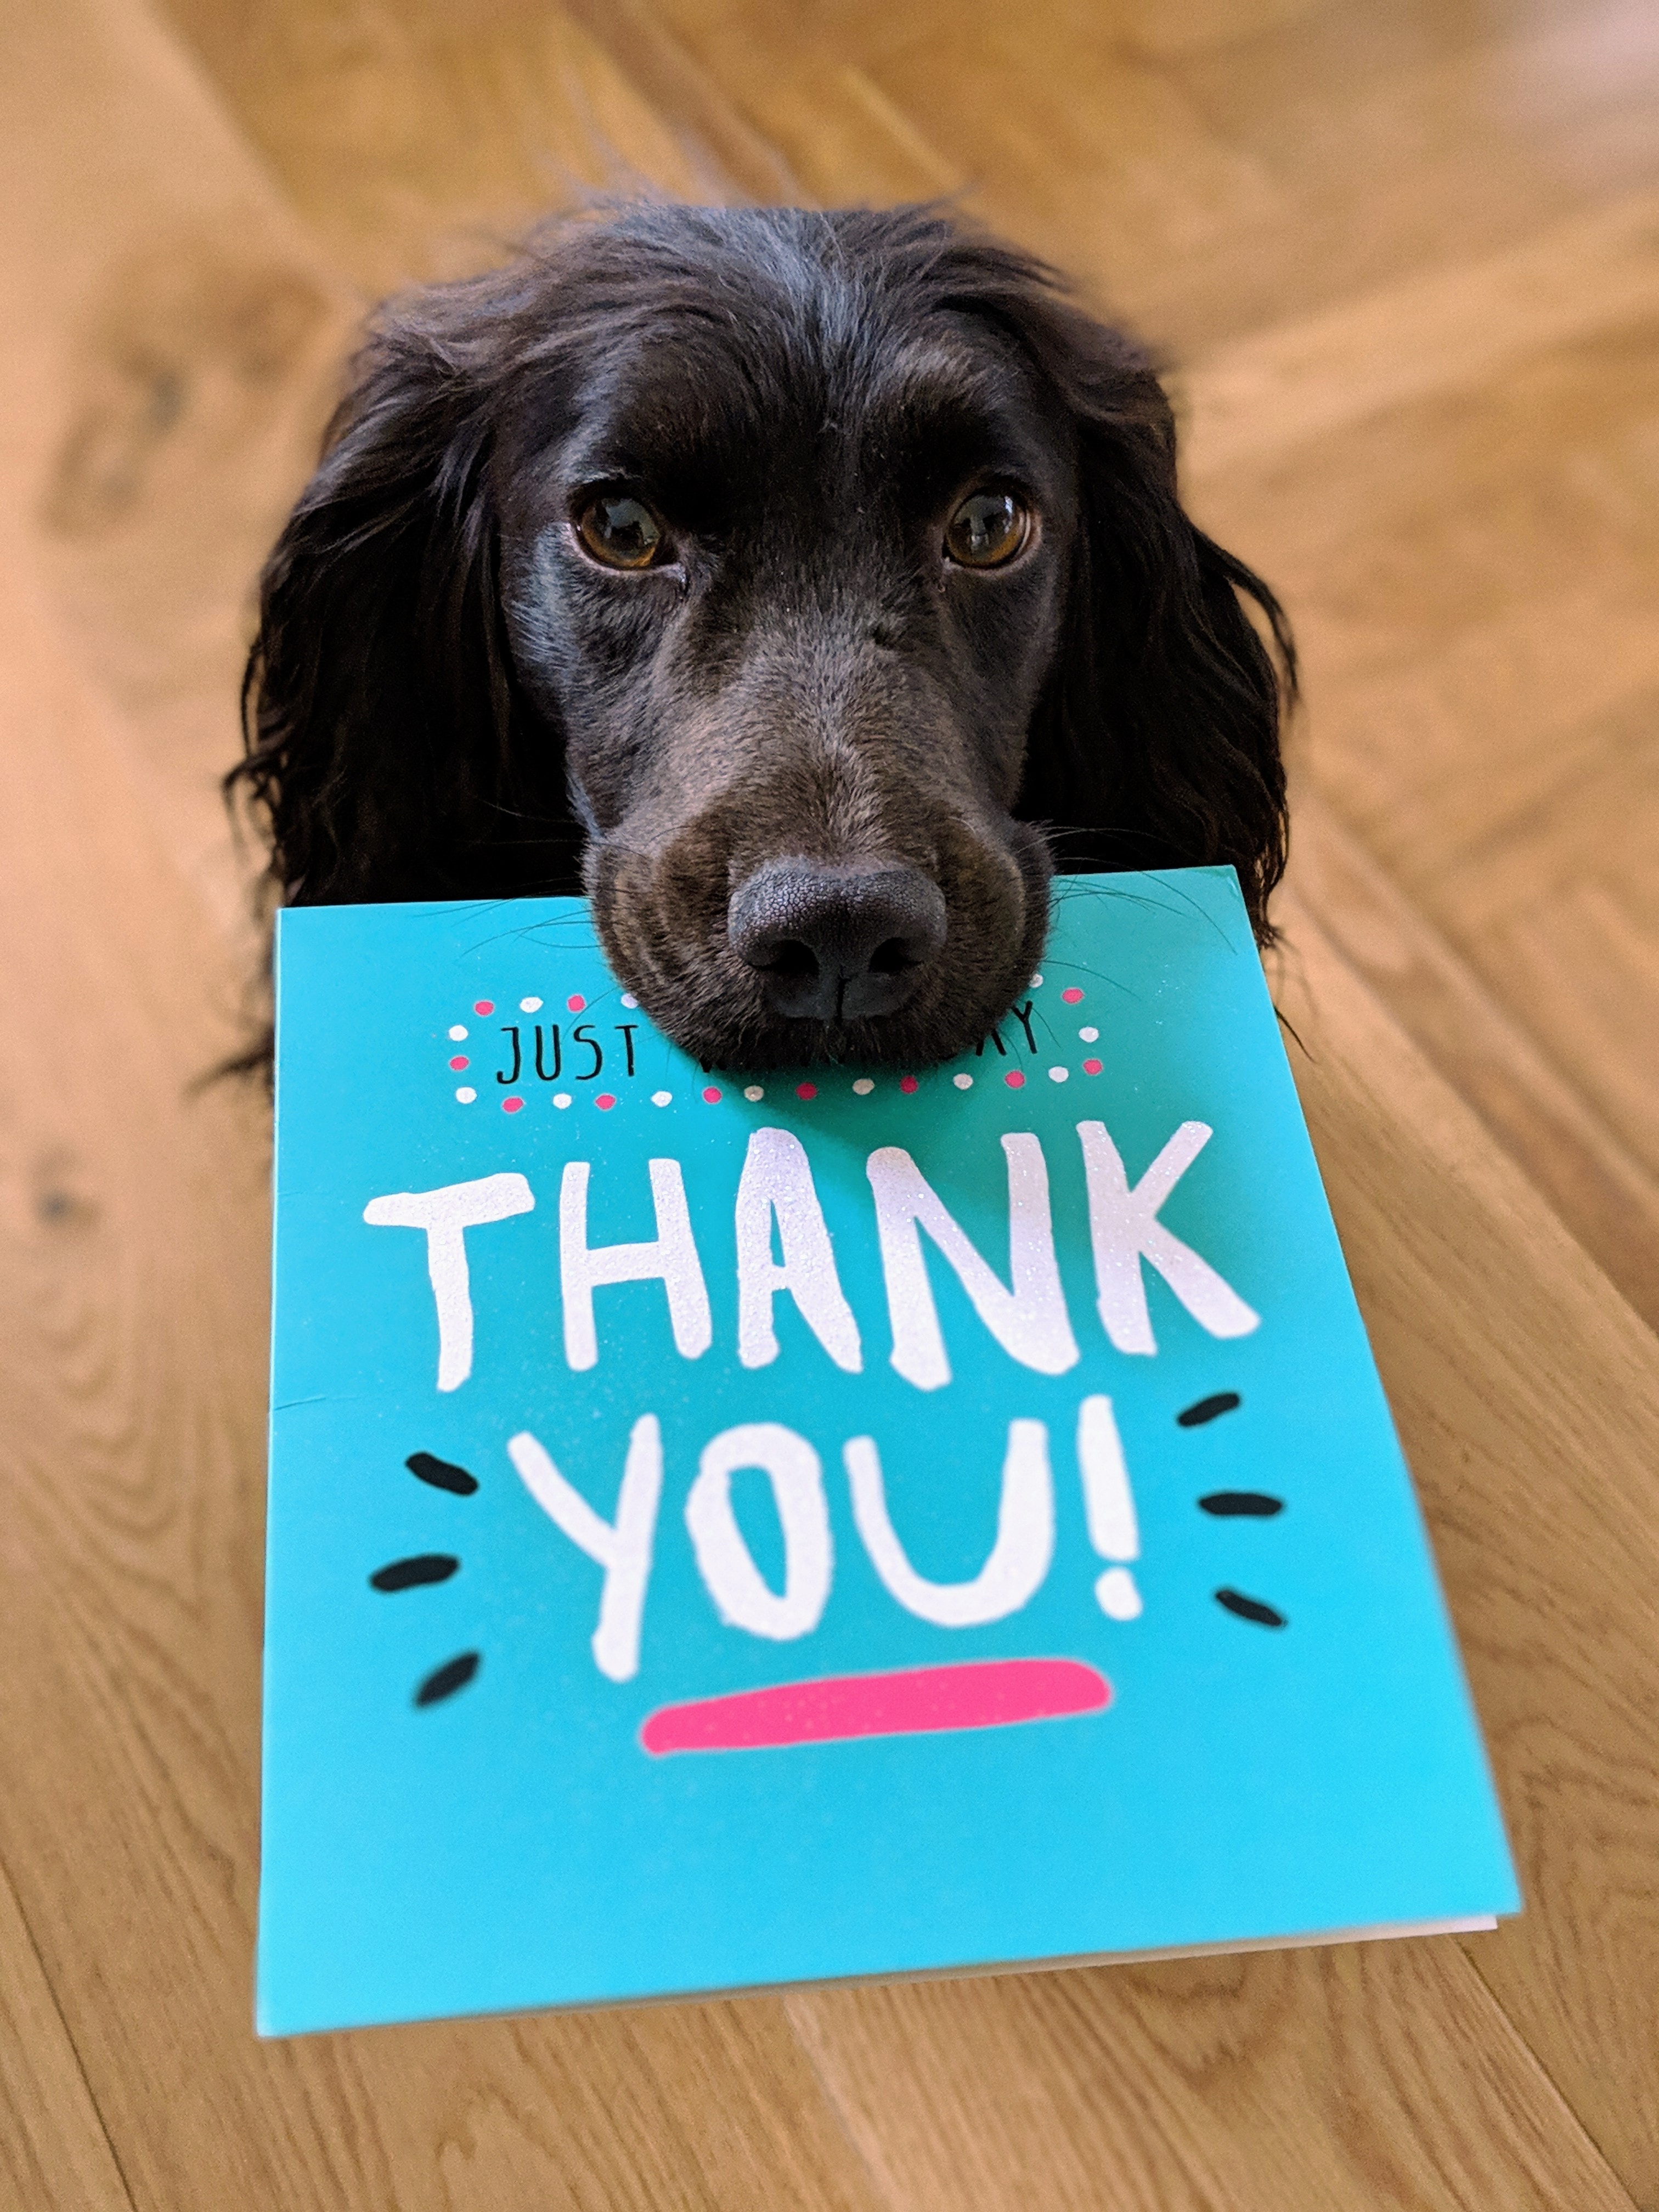 Dog holding a thank you card in its mouth